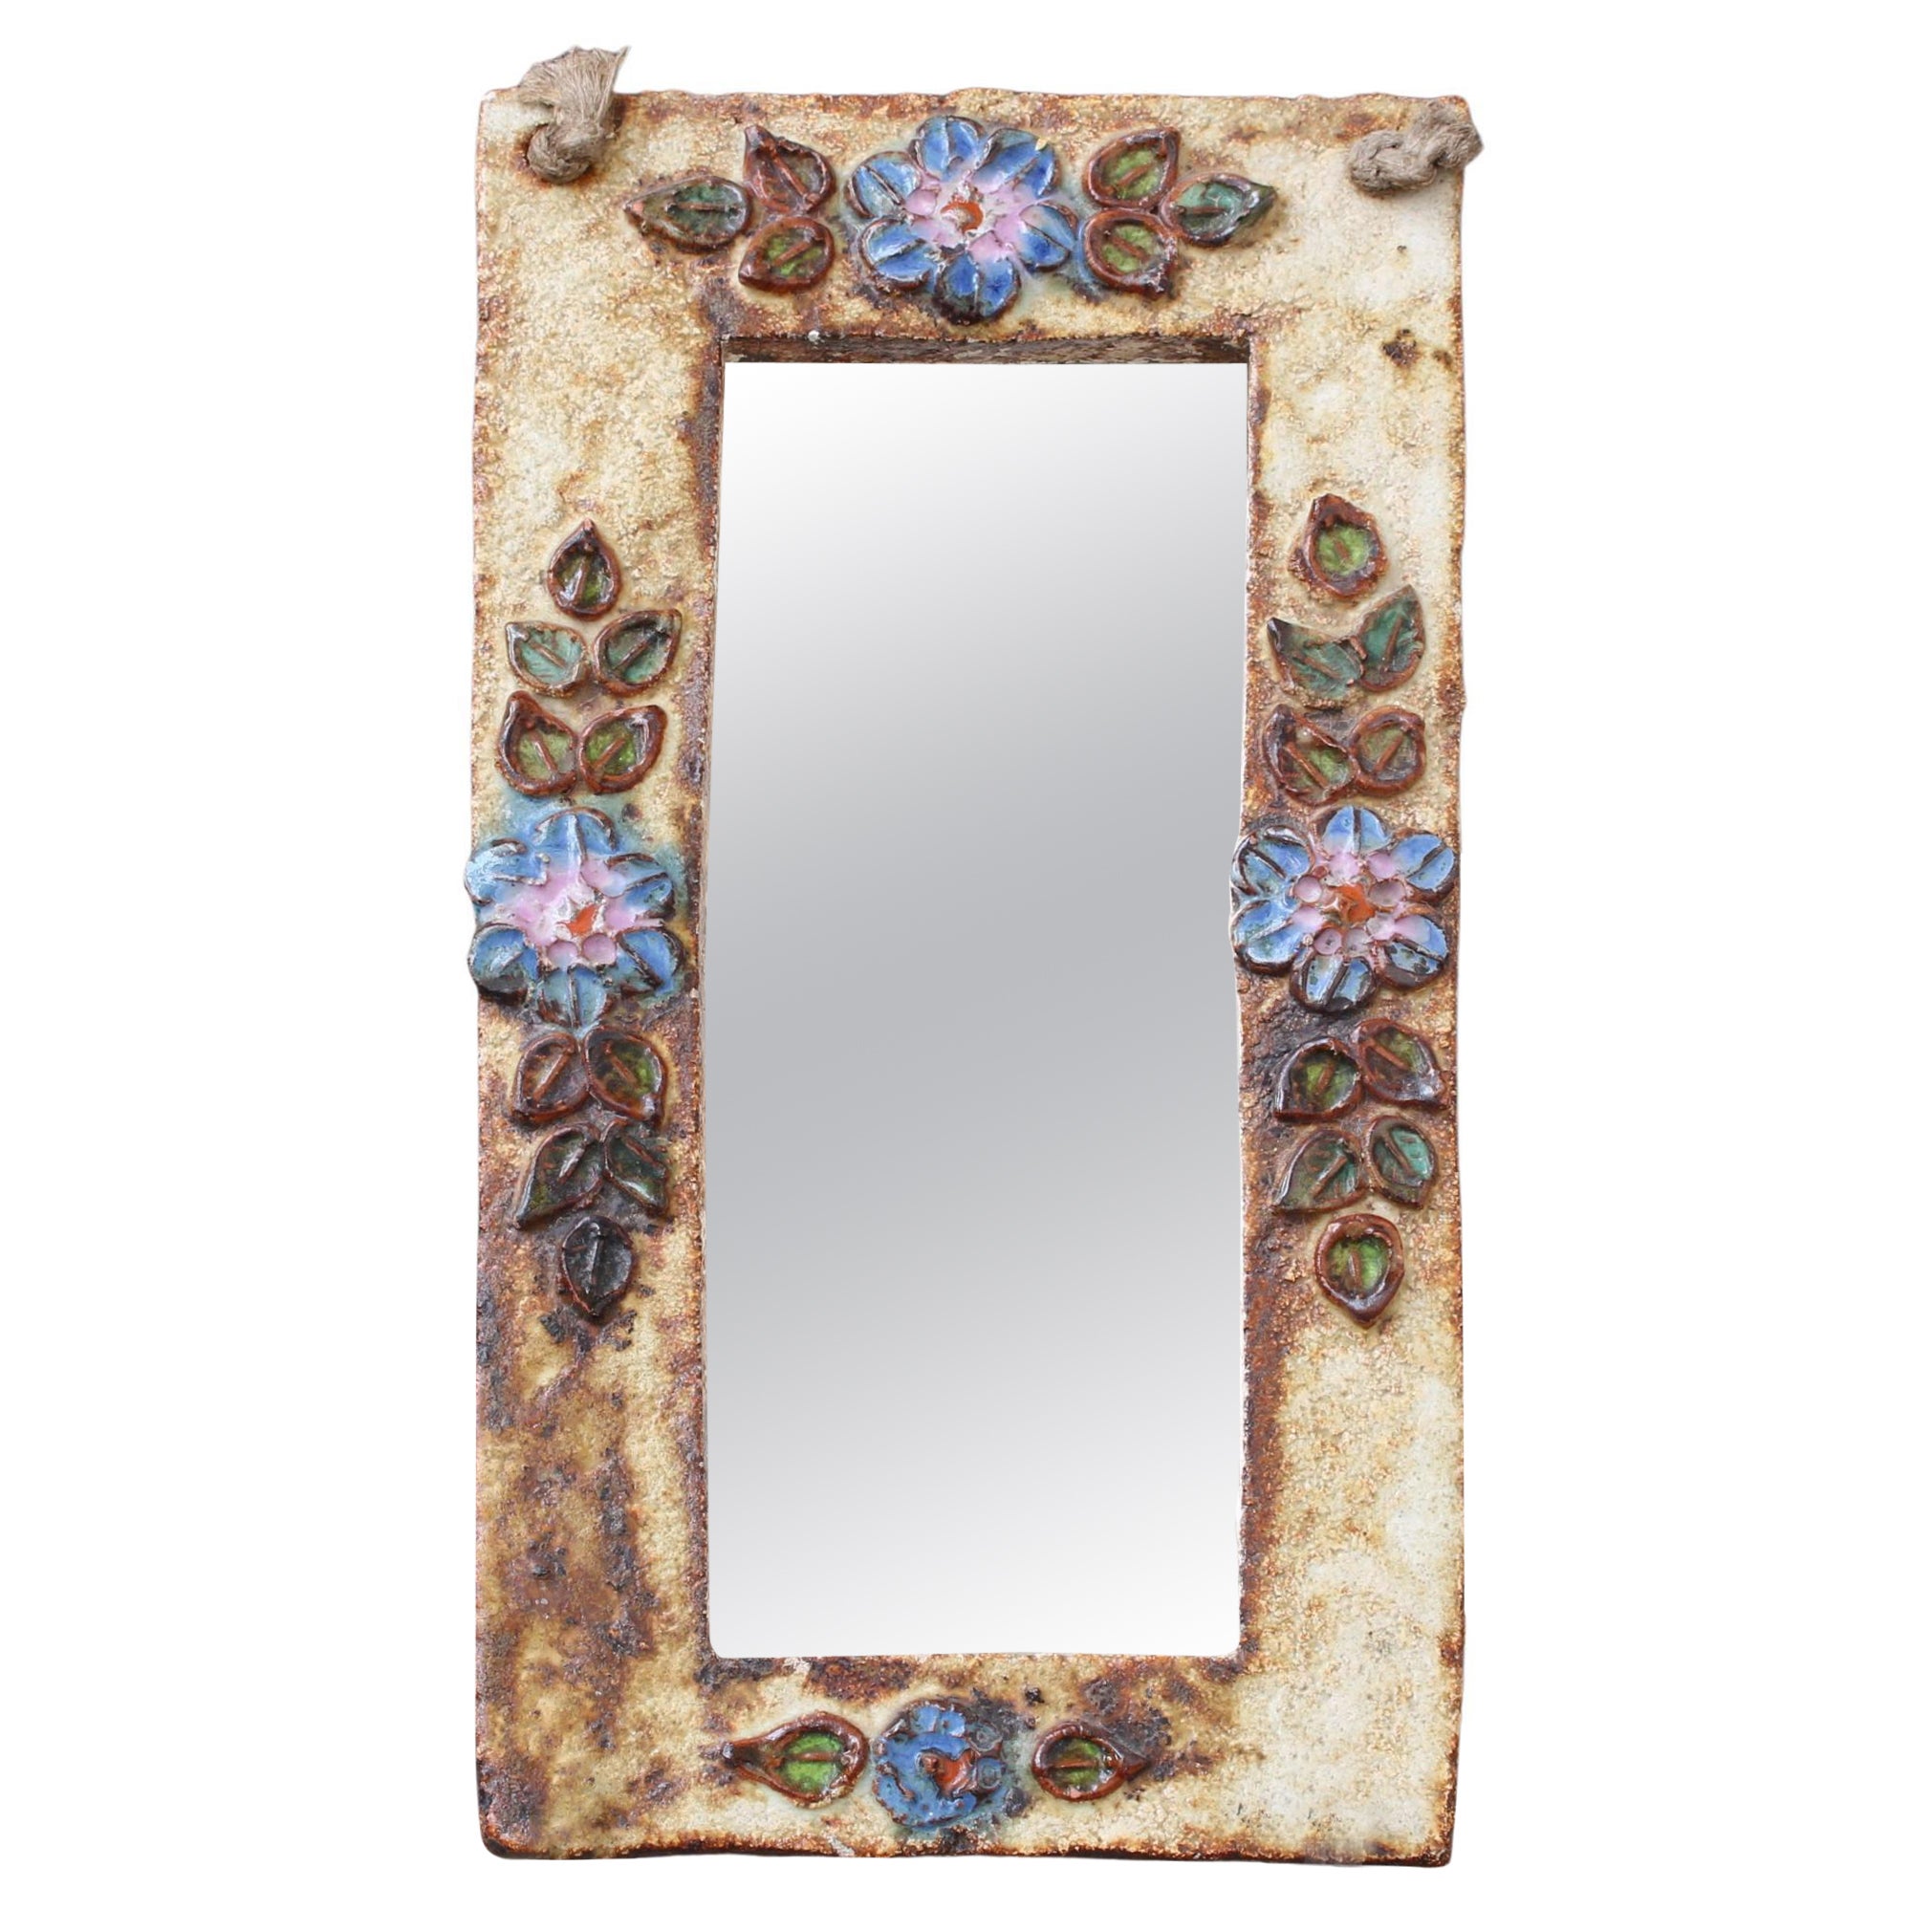 Ceramic Wall Mirror with Flower Motif by La Roue 'circa 1960s'